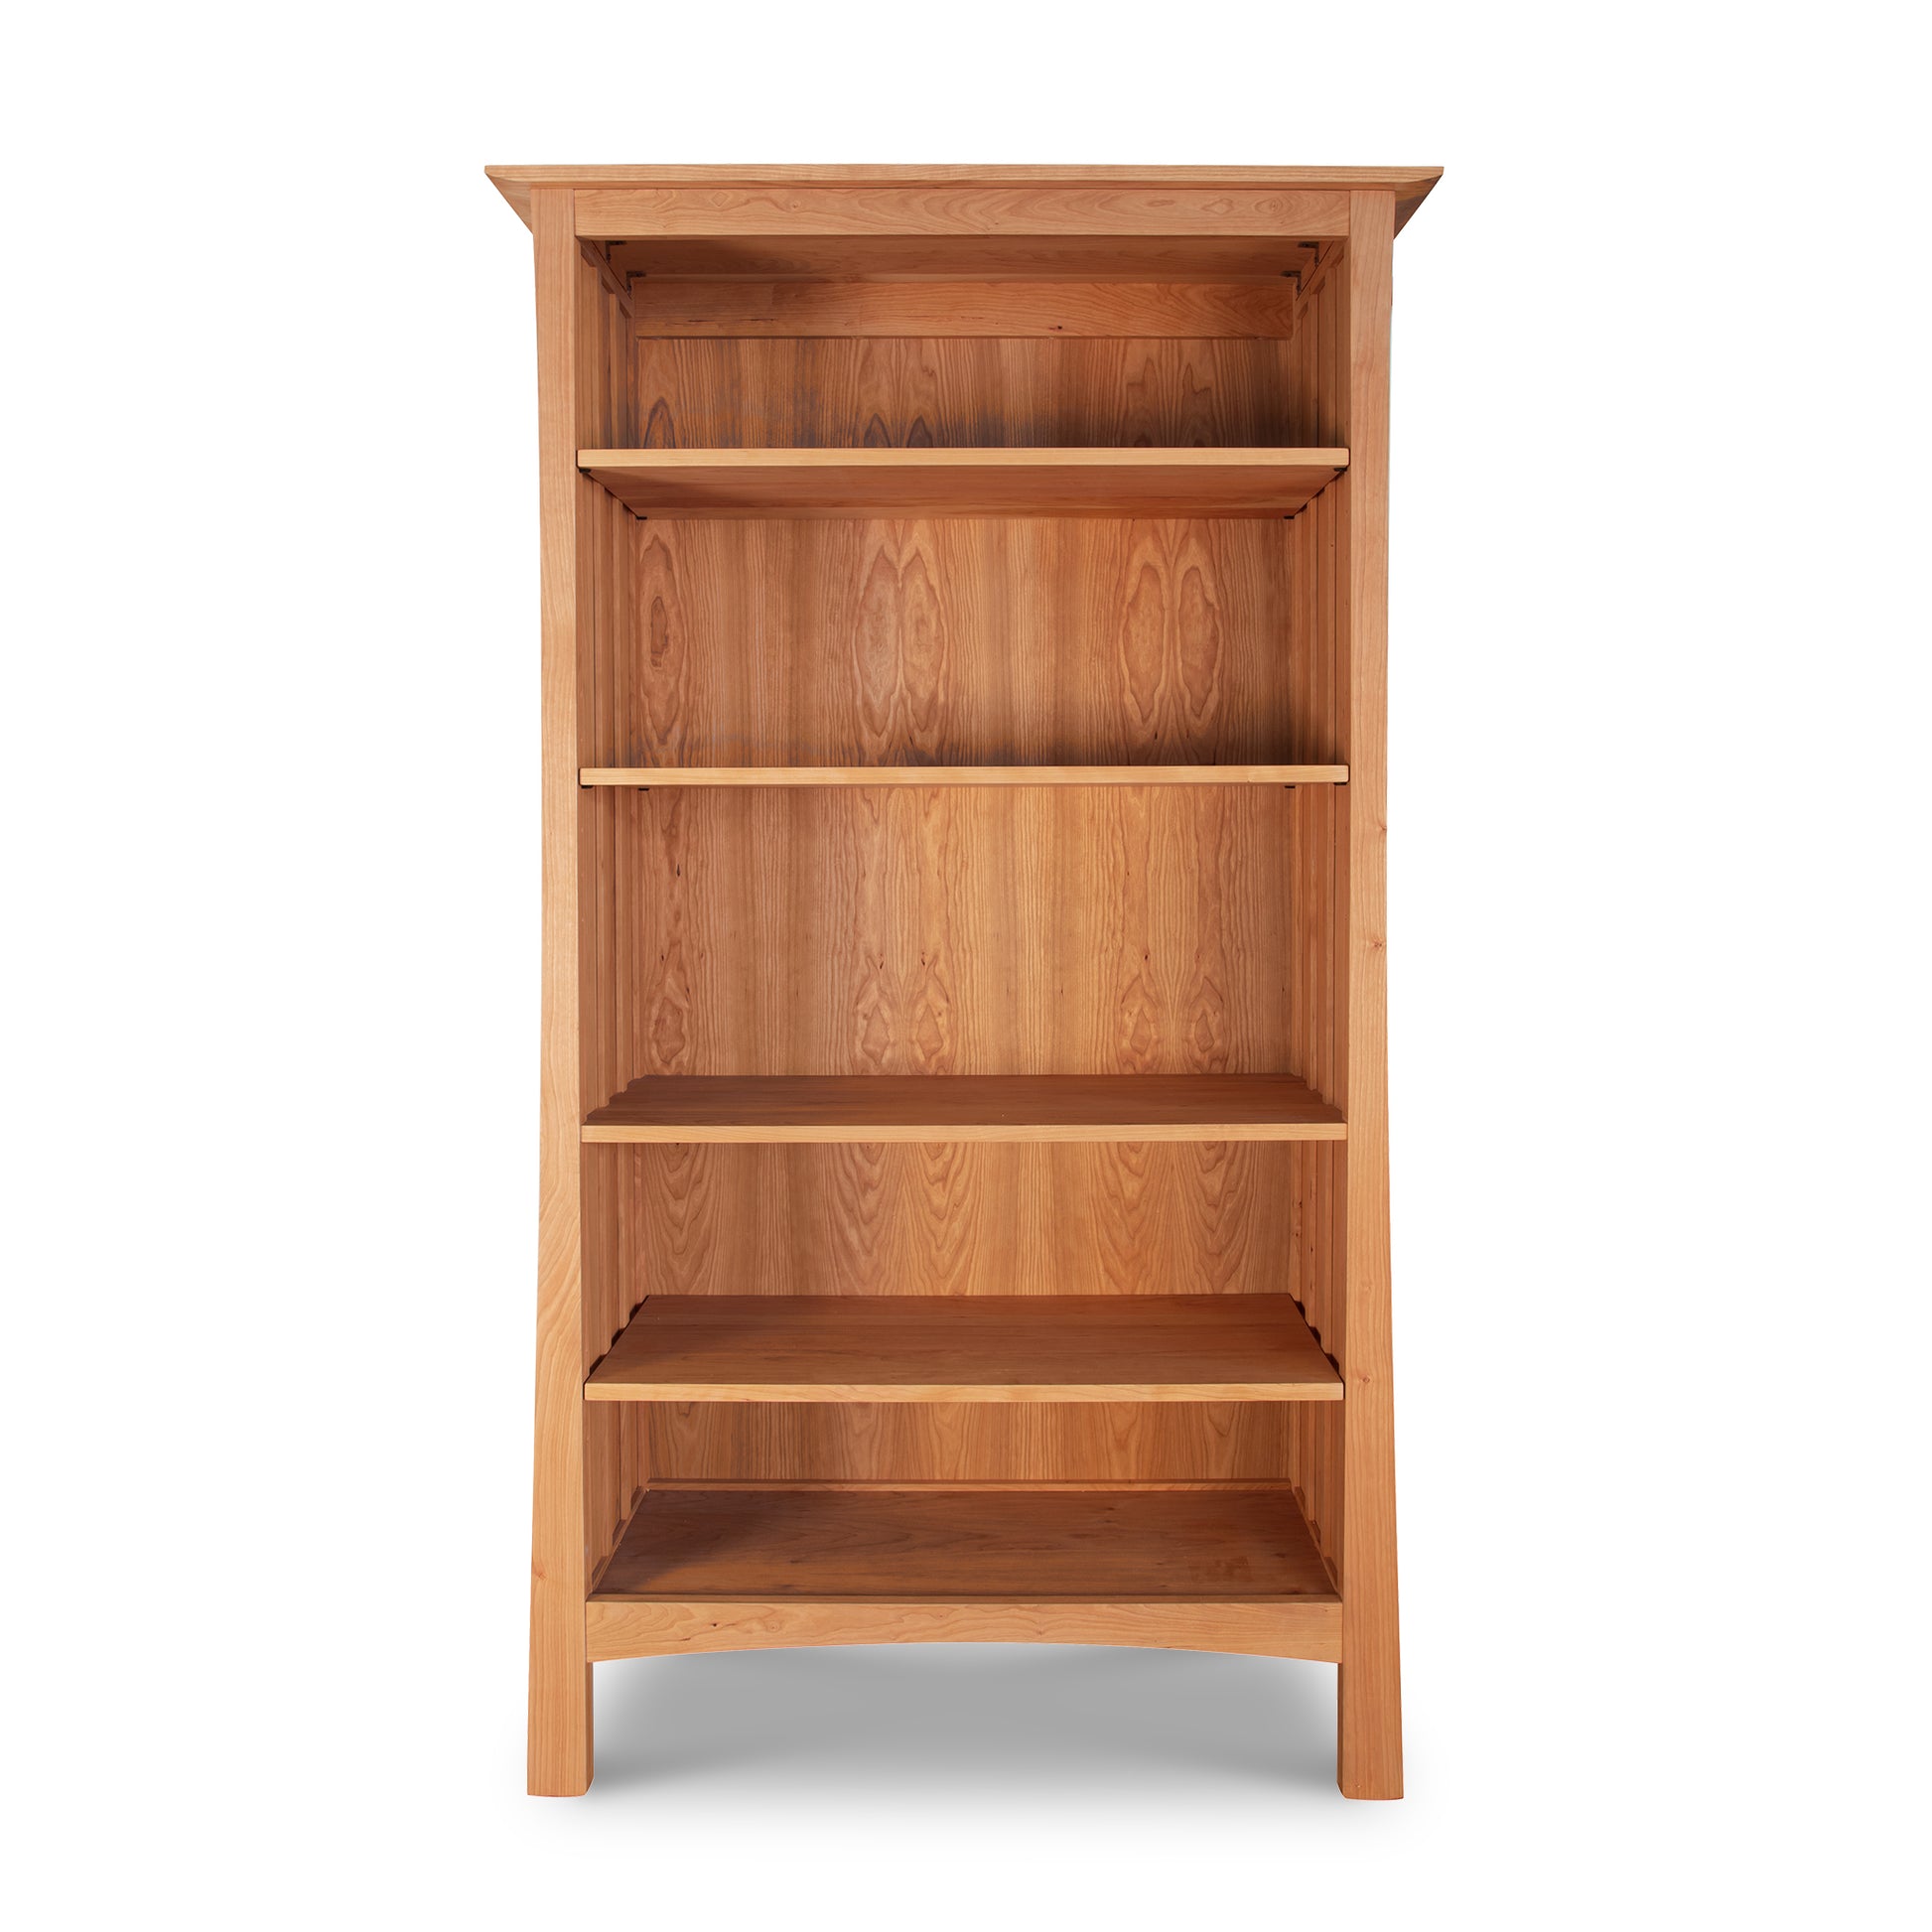 A handmade Contemporary Craftsman Custom Bookcase with four shelves, standing against a white background by Vermont Furniture Designs.